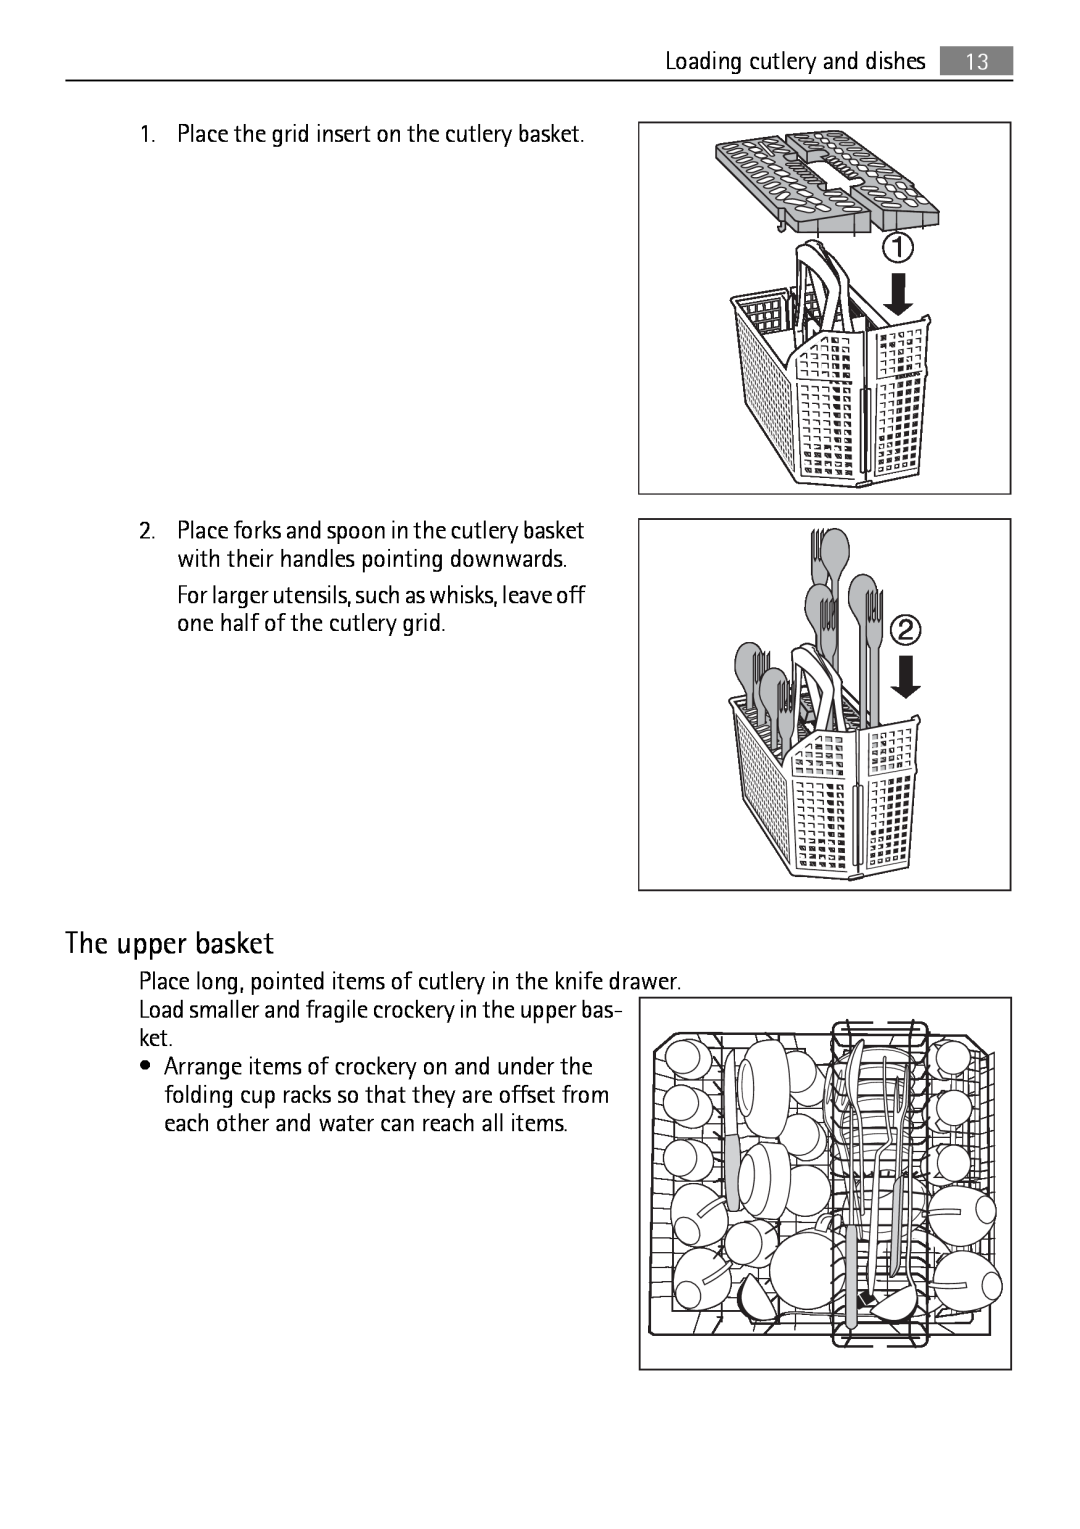 Electrolux QB 5201 user manual The upper basket, Place the grid insert on the cutlery basket 